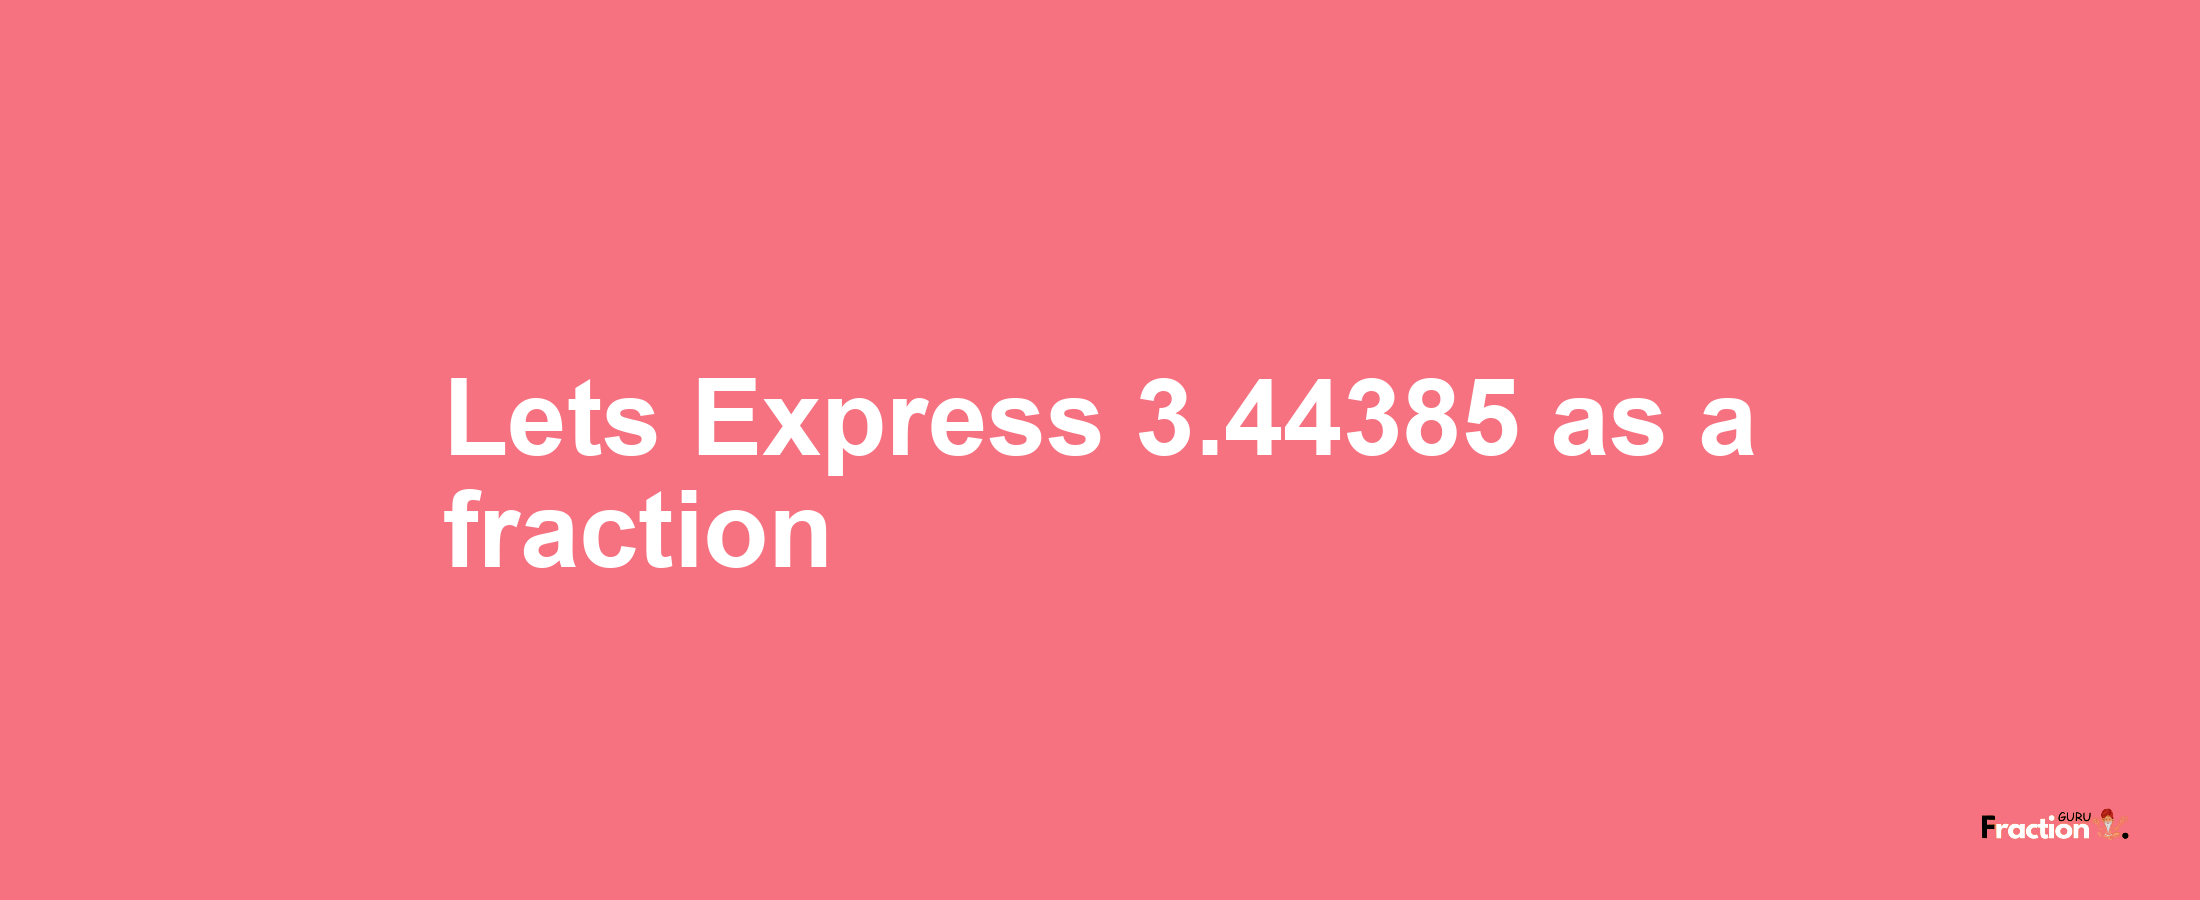 Lets Express 3.44385 as afraction